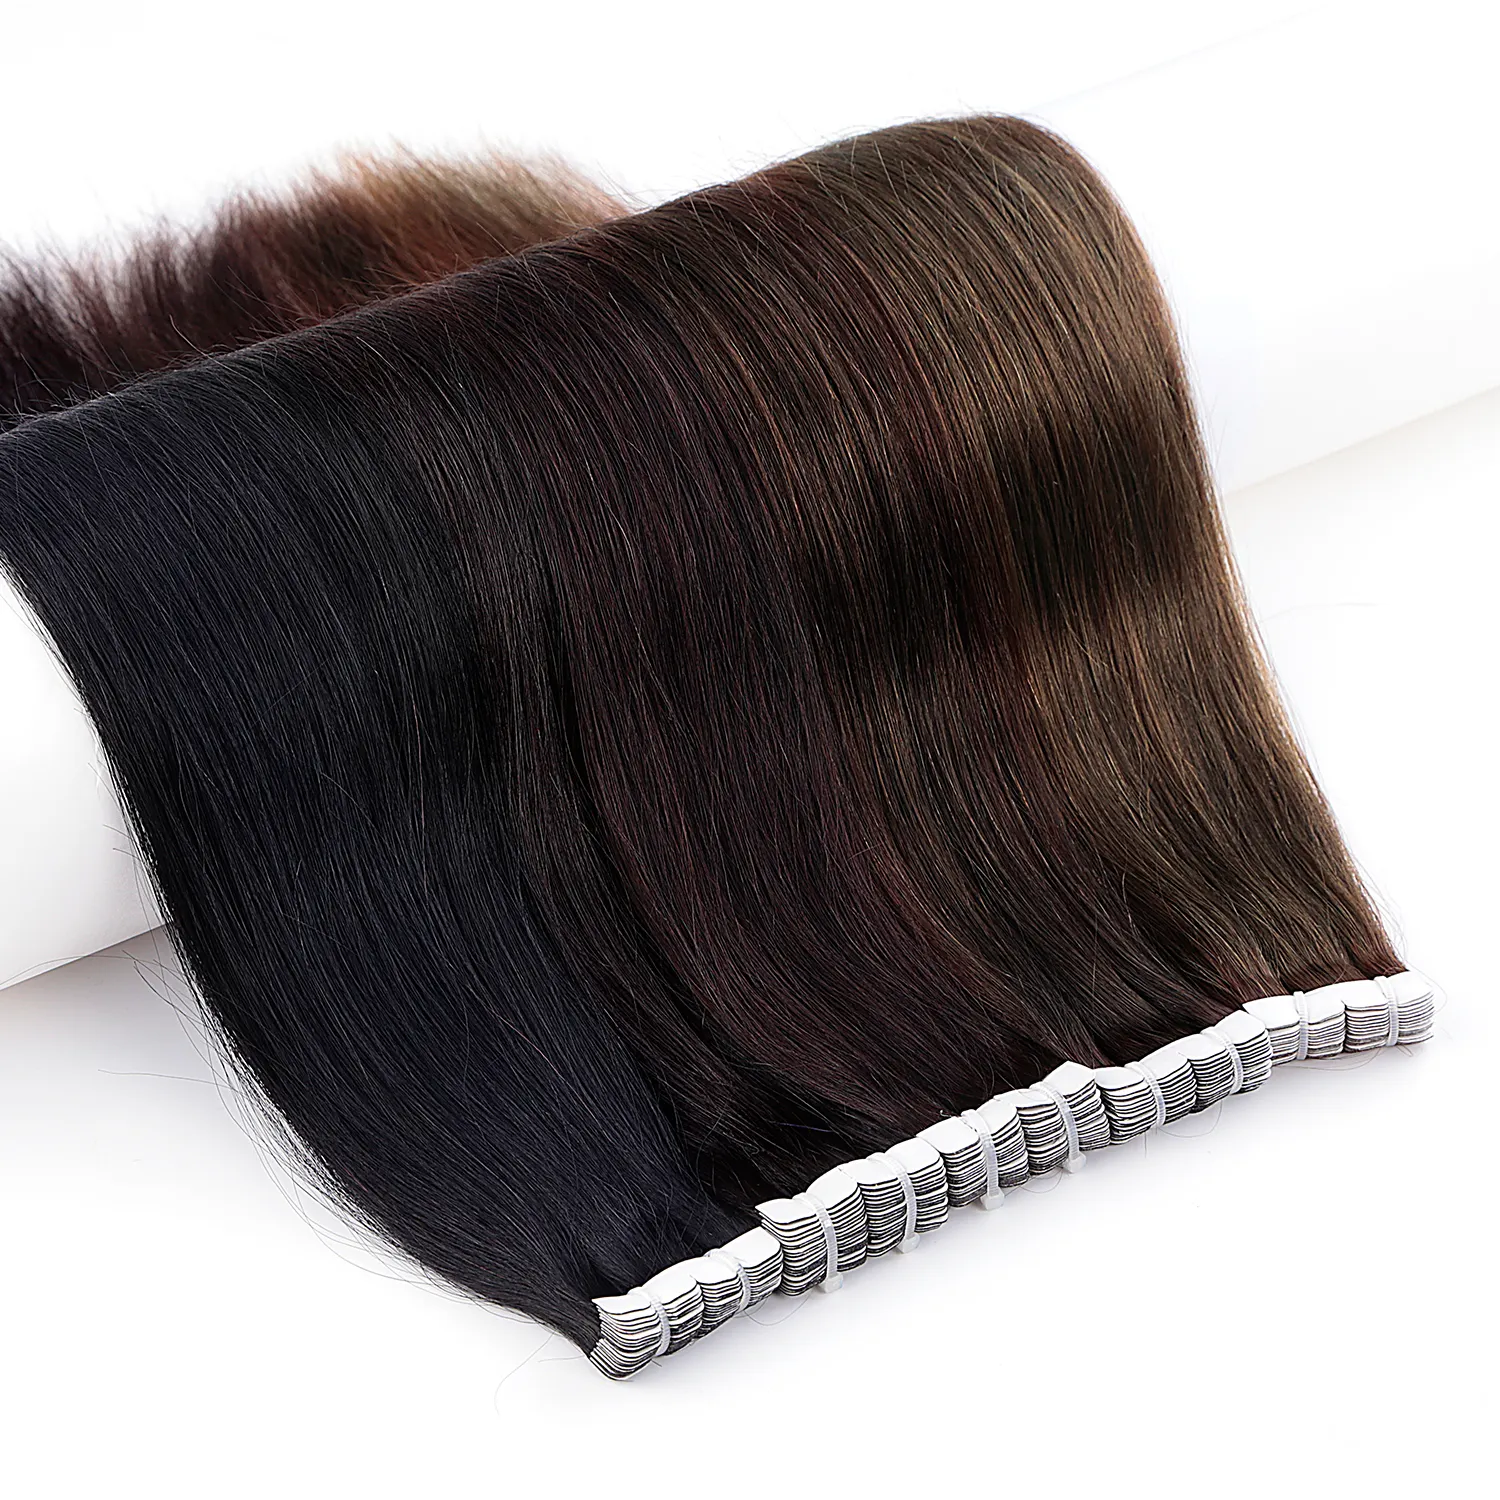 Salon Supply RAW 100% Human Remy Slim Double drawn Mini Tape In Hair Extension Ombre Balayage color Invisible OEM Wholesale